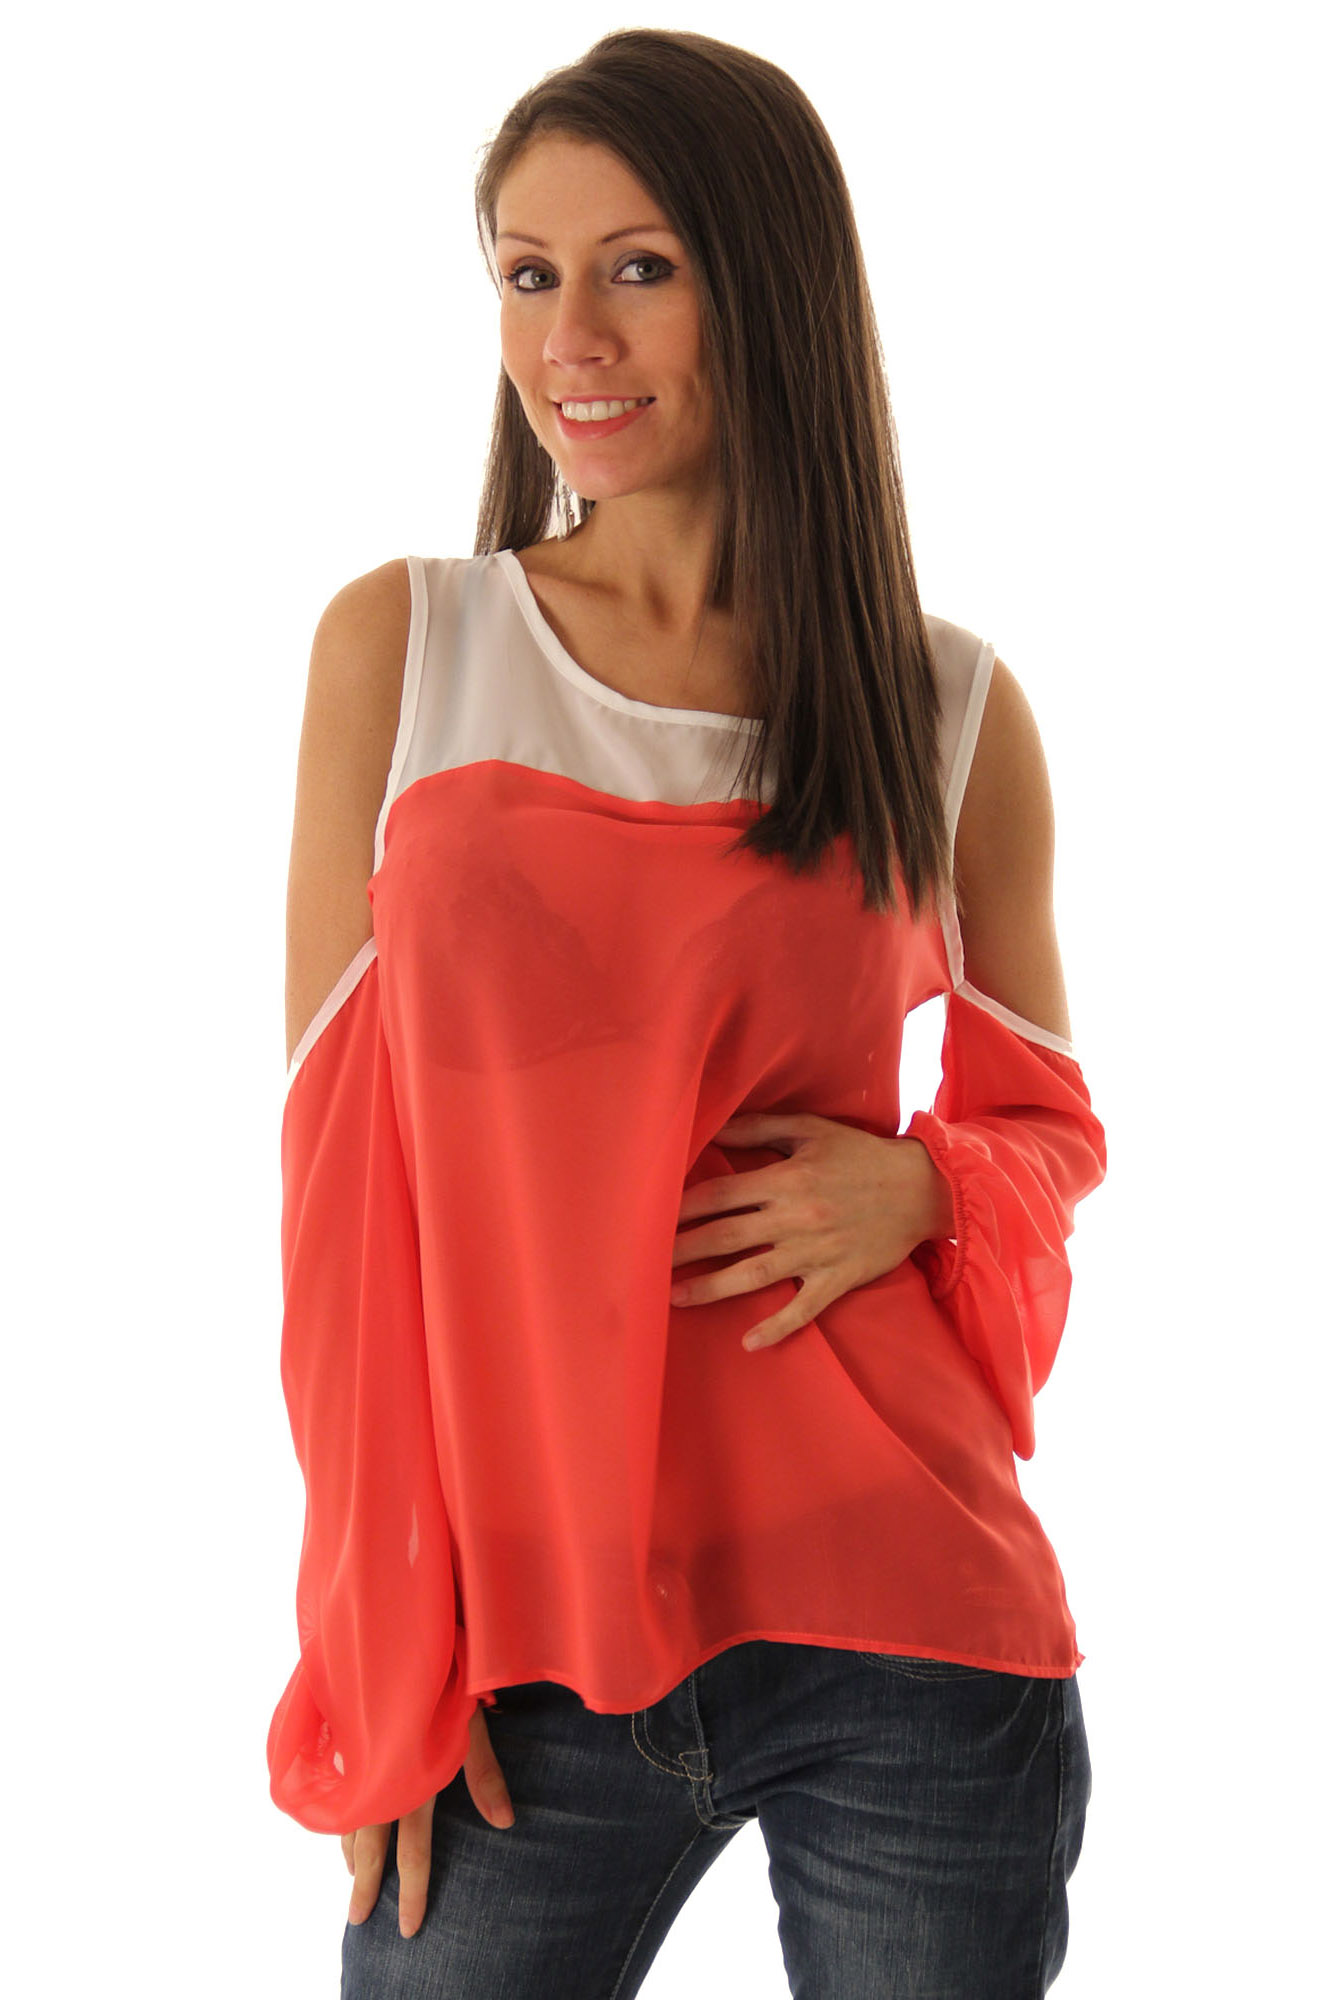 DHStyles.com DHStyles Women's Coral White Trendy Sheer Cold Shoulder Tunic Top - Large